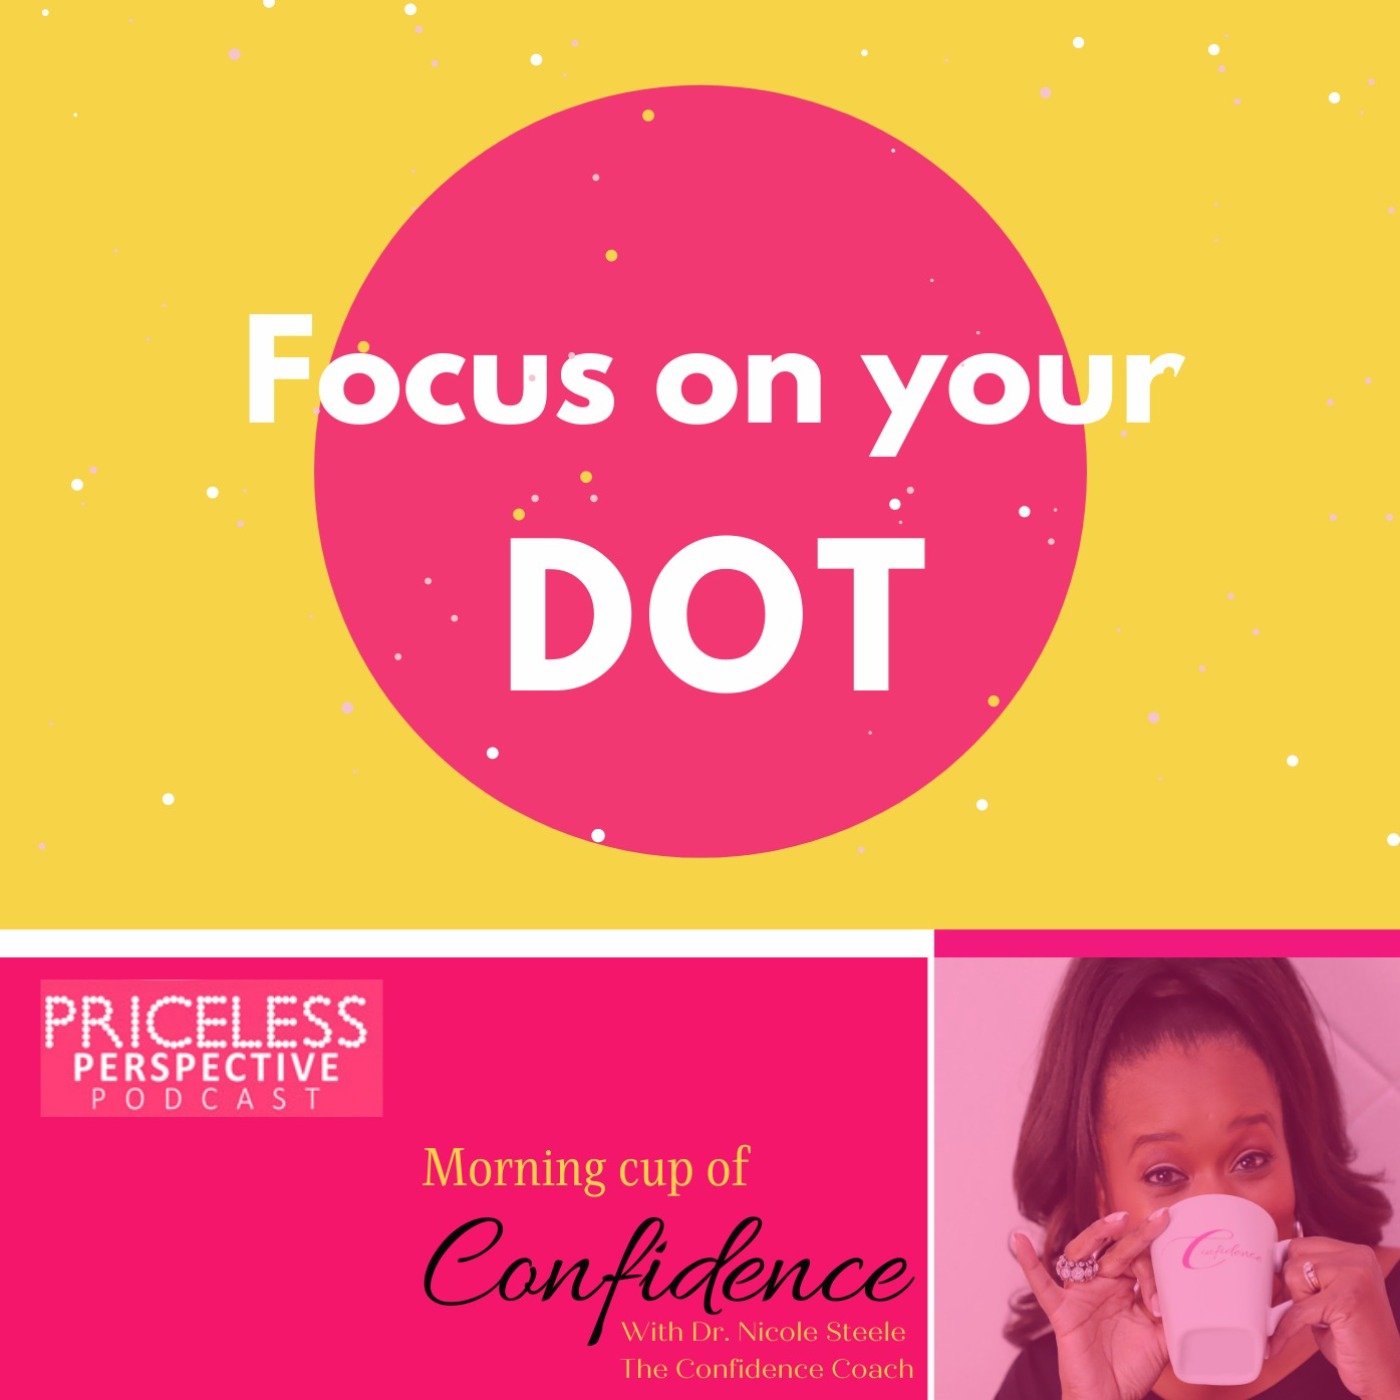 Focus on your DOT